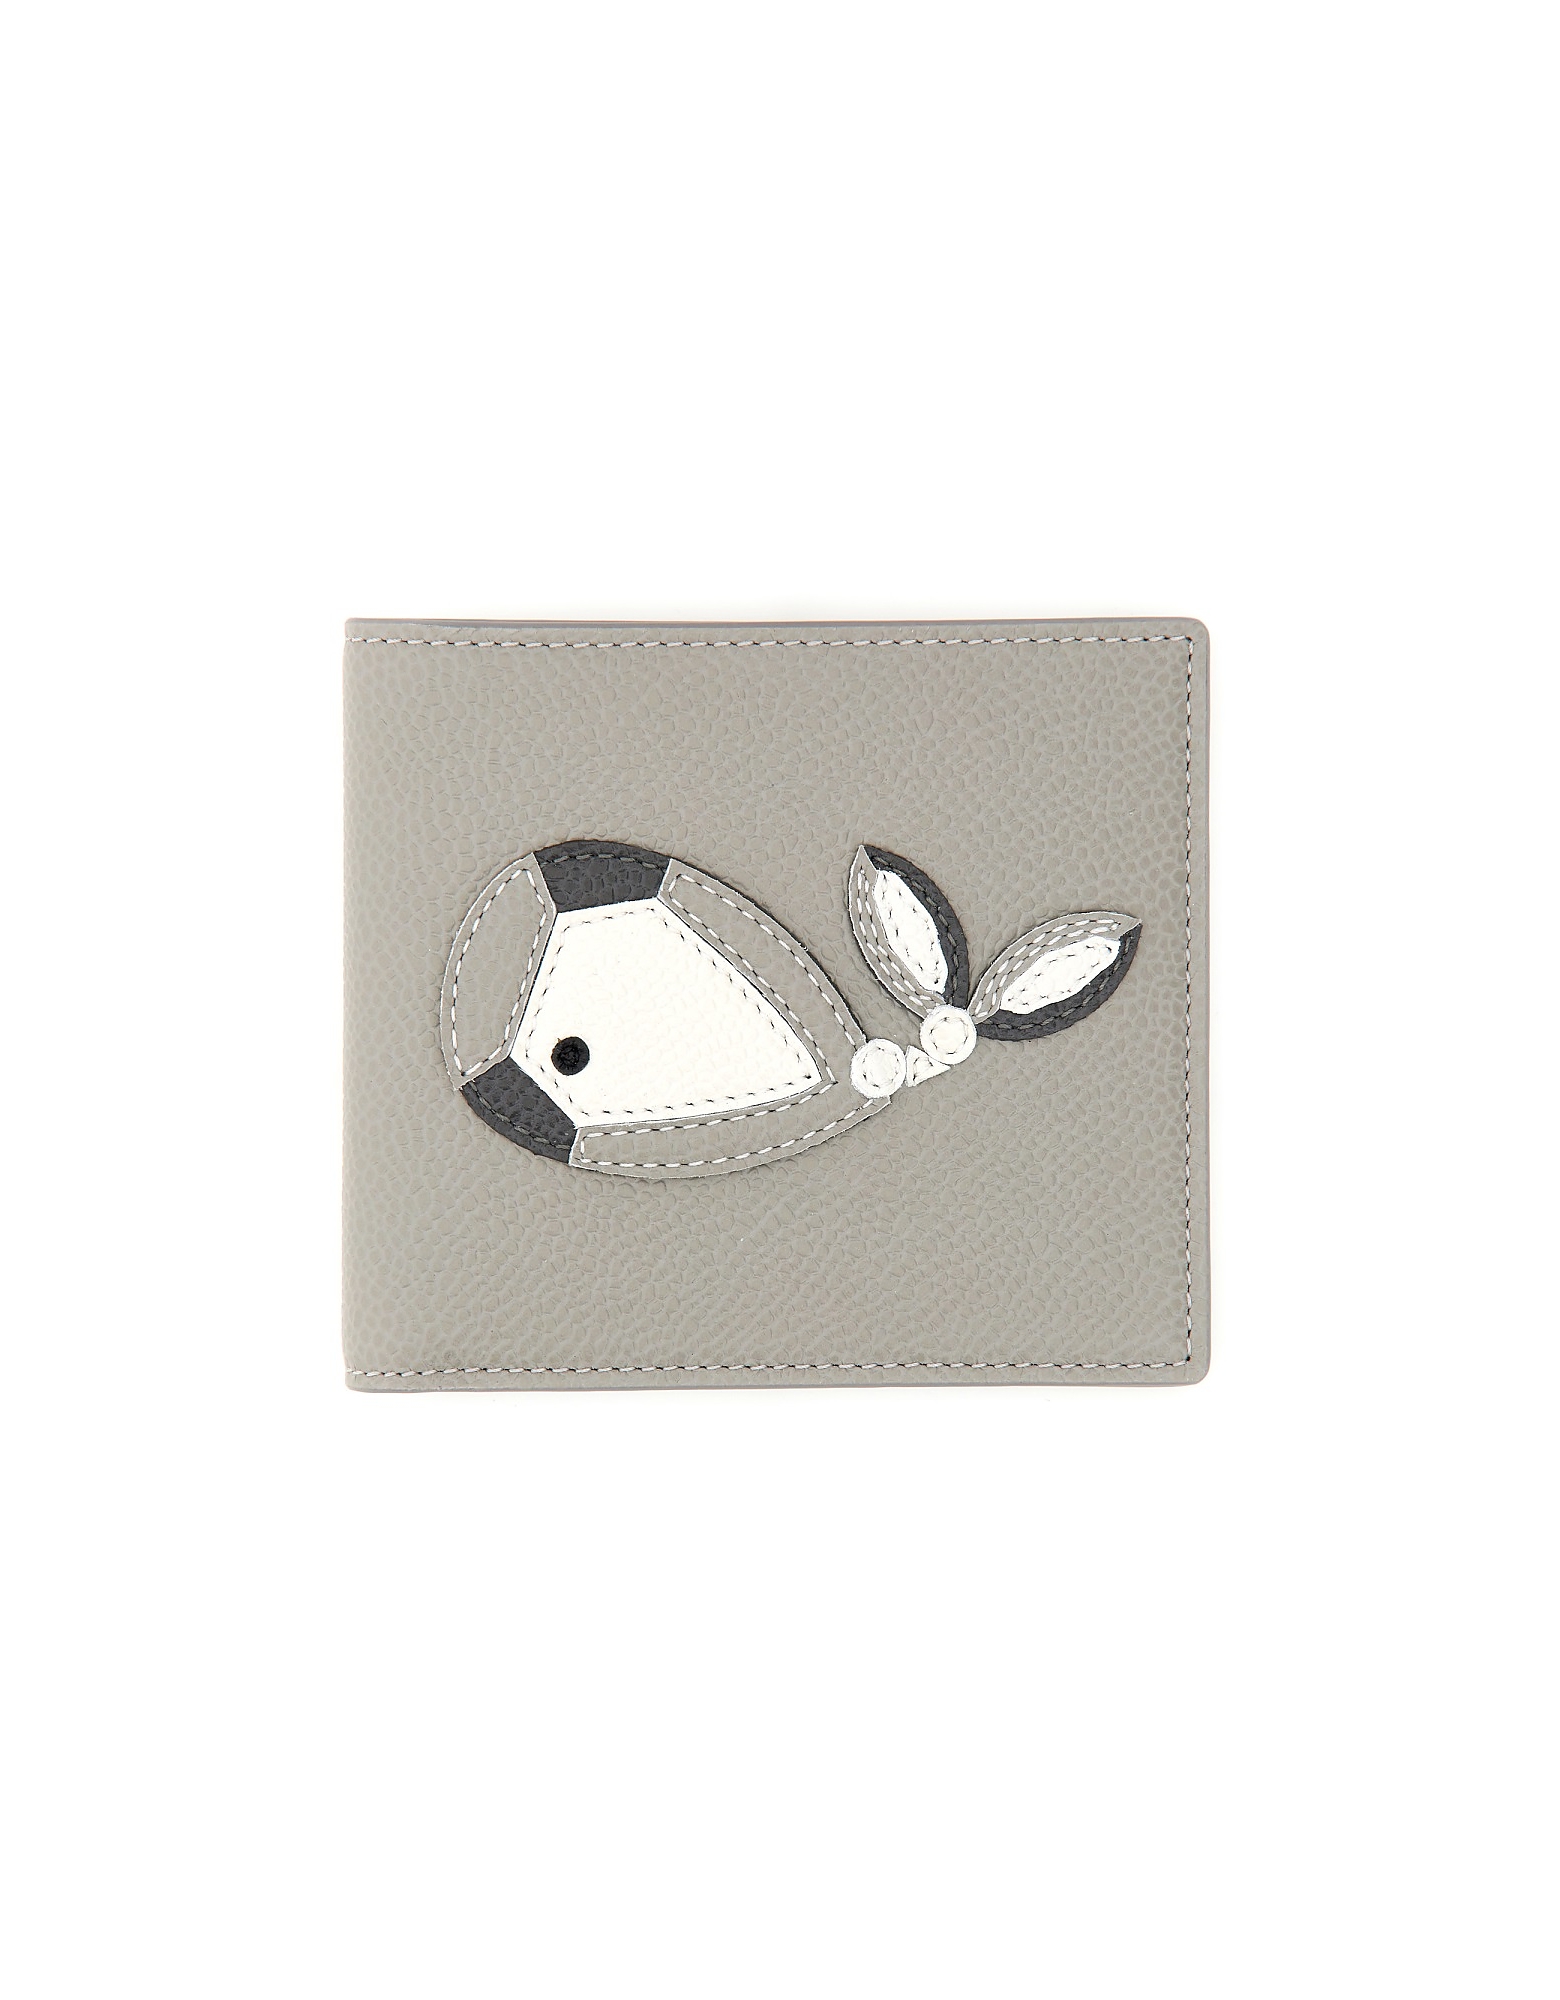 THOM BROWNE DESIGNER MEN'S BAGS WALLET WITH WHALE APPLICATION